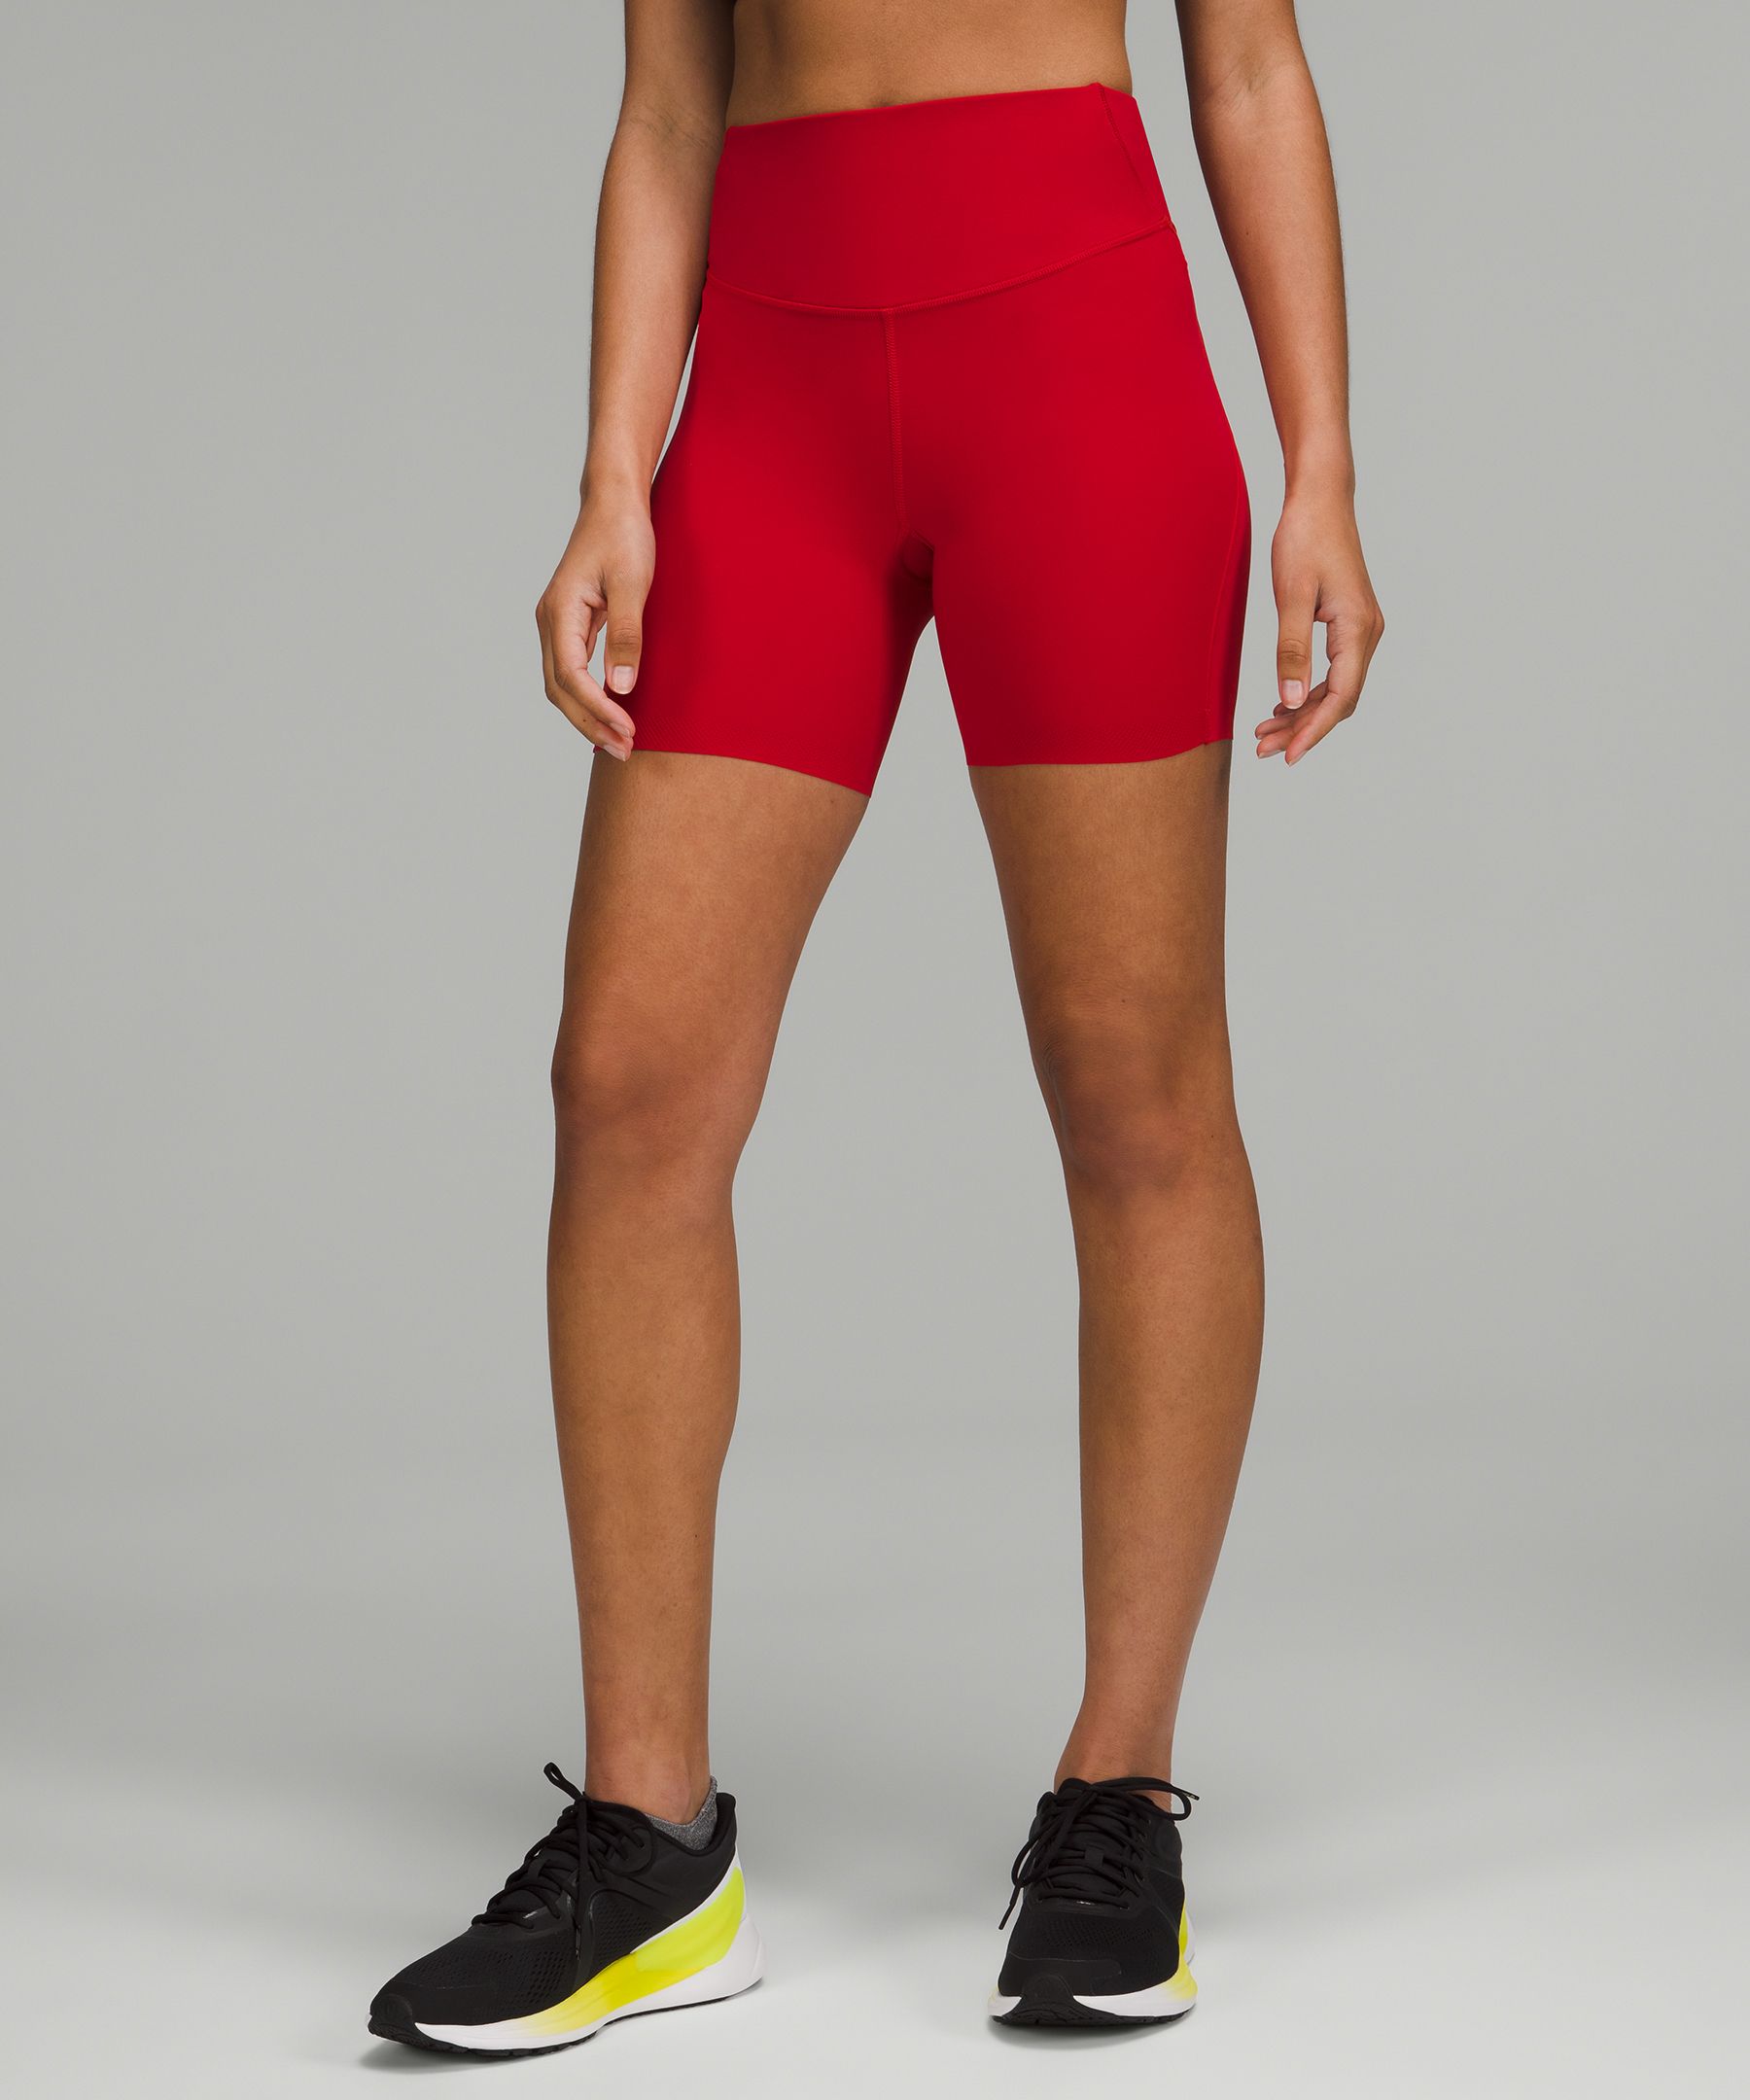 Lululemon Base Pace High-rise Shorts 6" In Dark Red